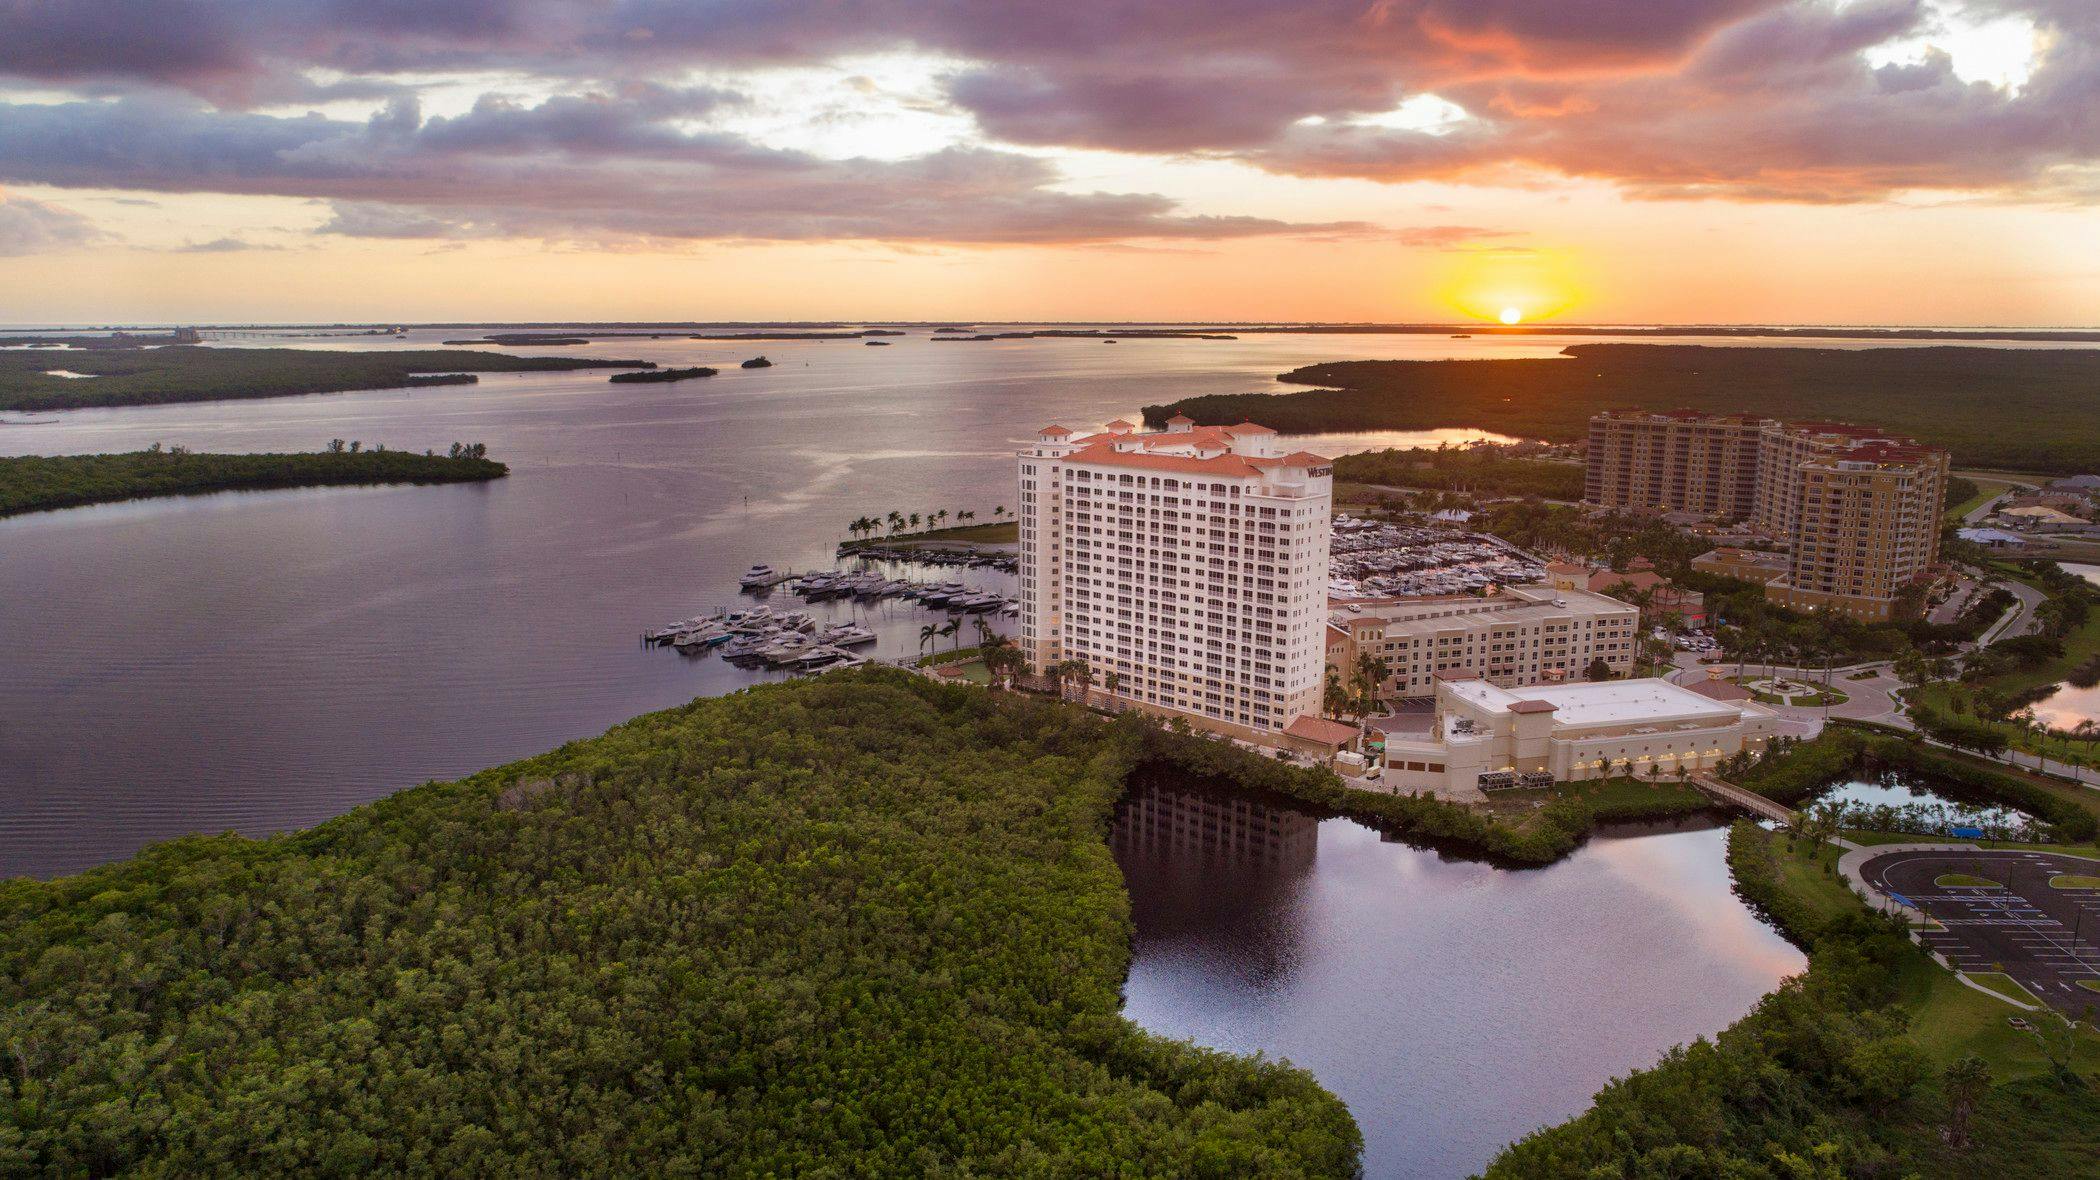 Organic & Natural Health Association’s annual conference takes place in Florida next week